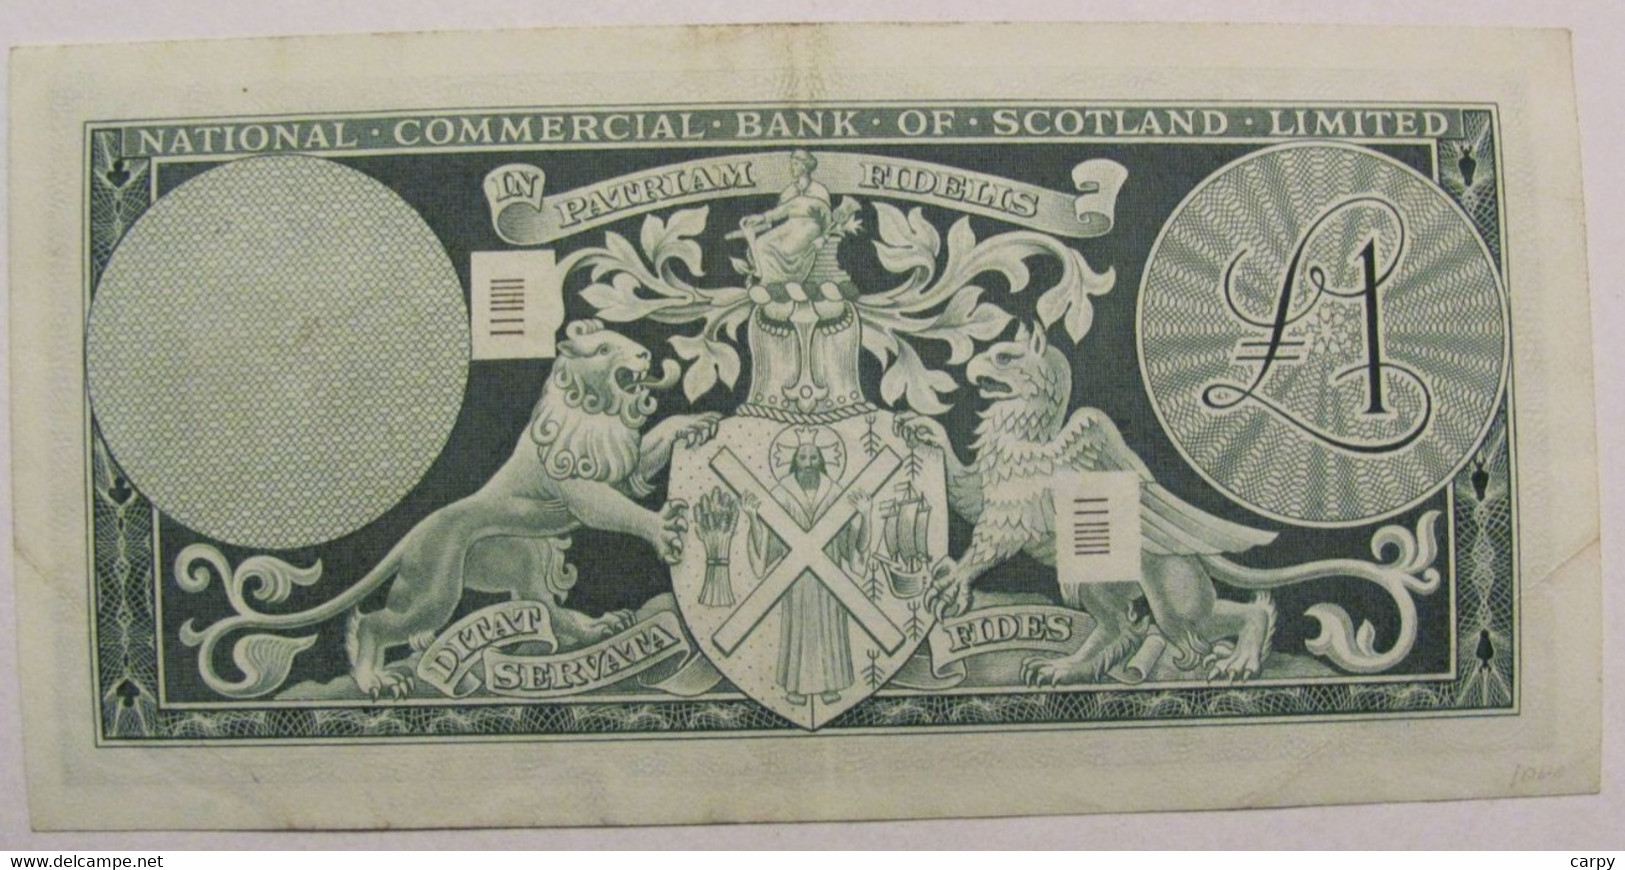 Pound 04 - Th Of January 1968 / THE NATIONAL COMMERCIAL BANK Of SCOTLAND Ltd / Very Nice Looking / RARE - 1 Pound